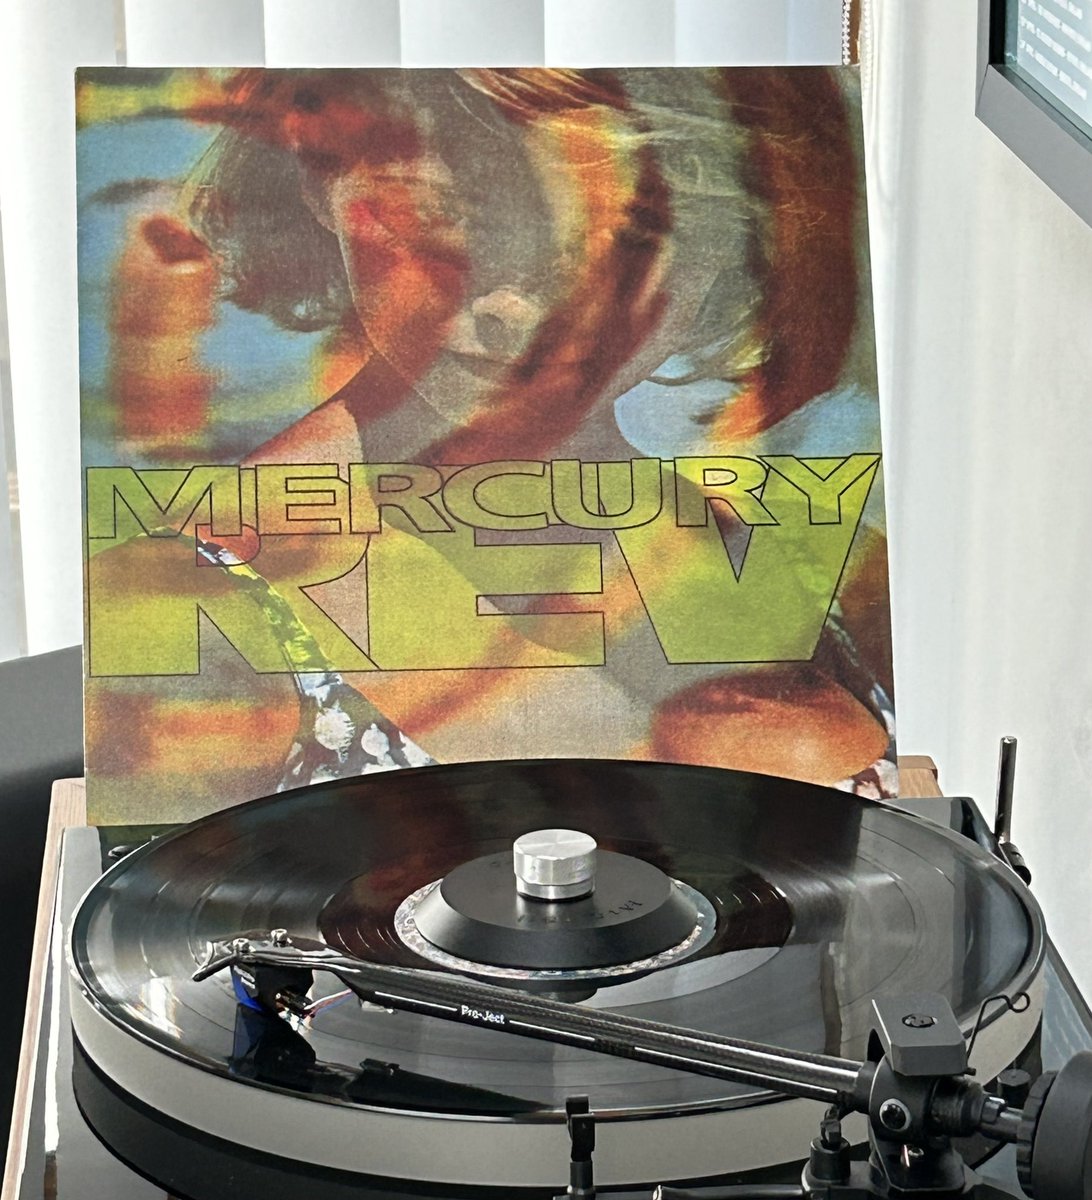 #5albums90s1 Mercury Rev - Yerself Is Steam In a world of overlooked classic albums, this would be near the top of my pile! Underneath the sinister, distorted & shoegaze guitar noise are the most amazing melodies, an album so iconic & of its time it often gets ignored, genius!